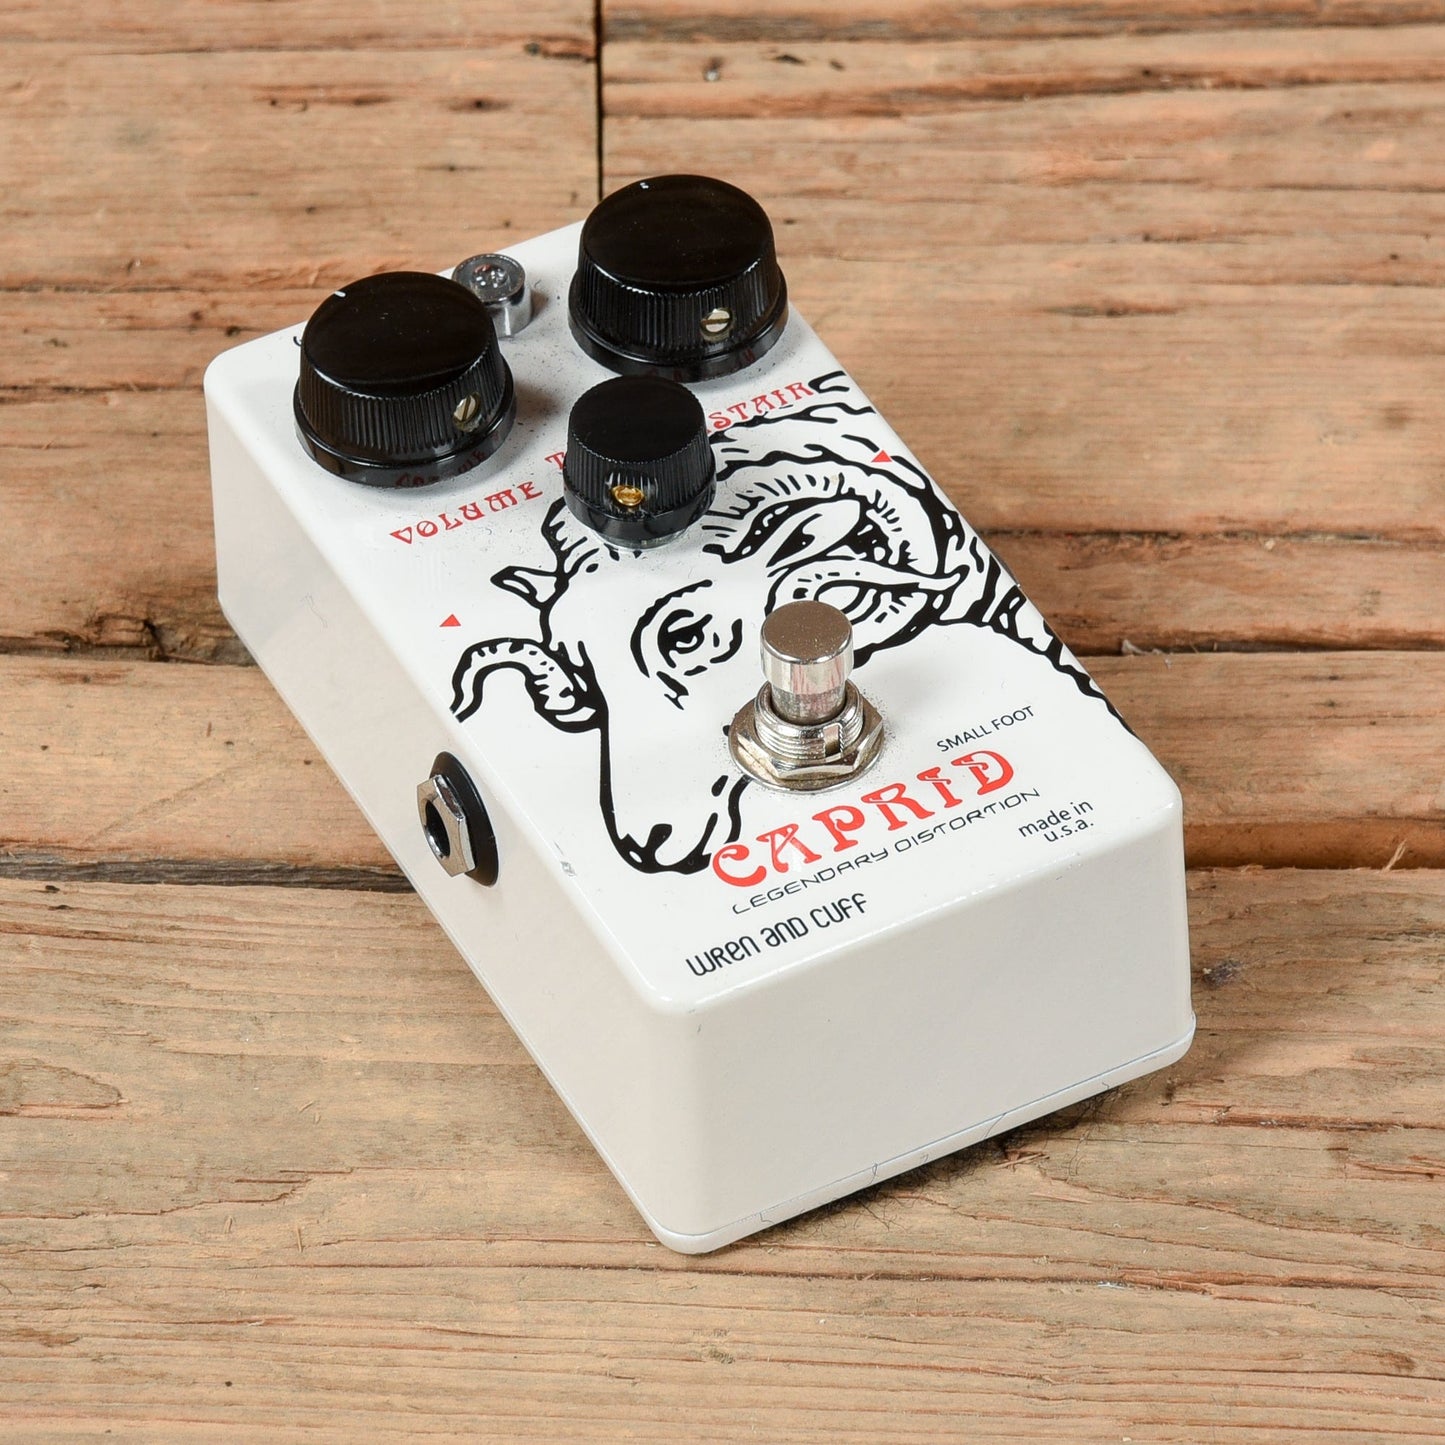 Wren and Cuff Caprid Small Foot Effects and Pedals / Fuzz